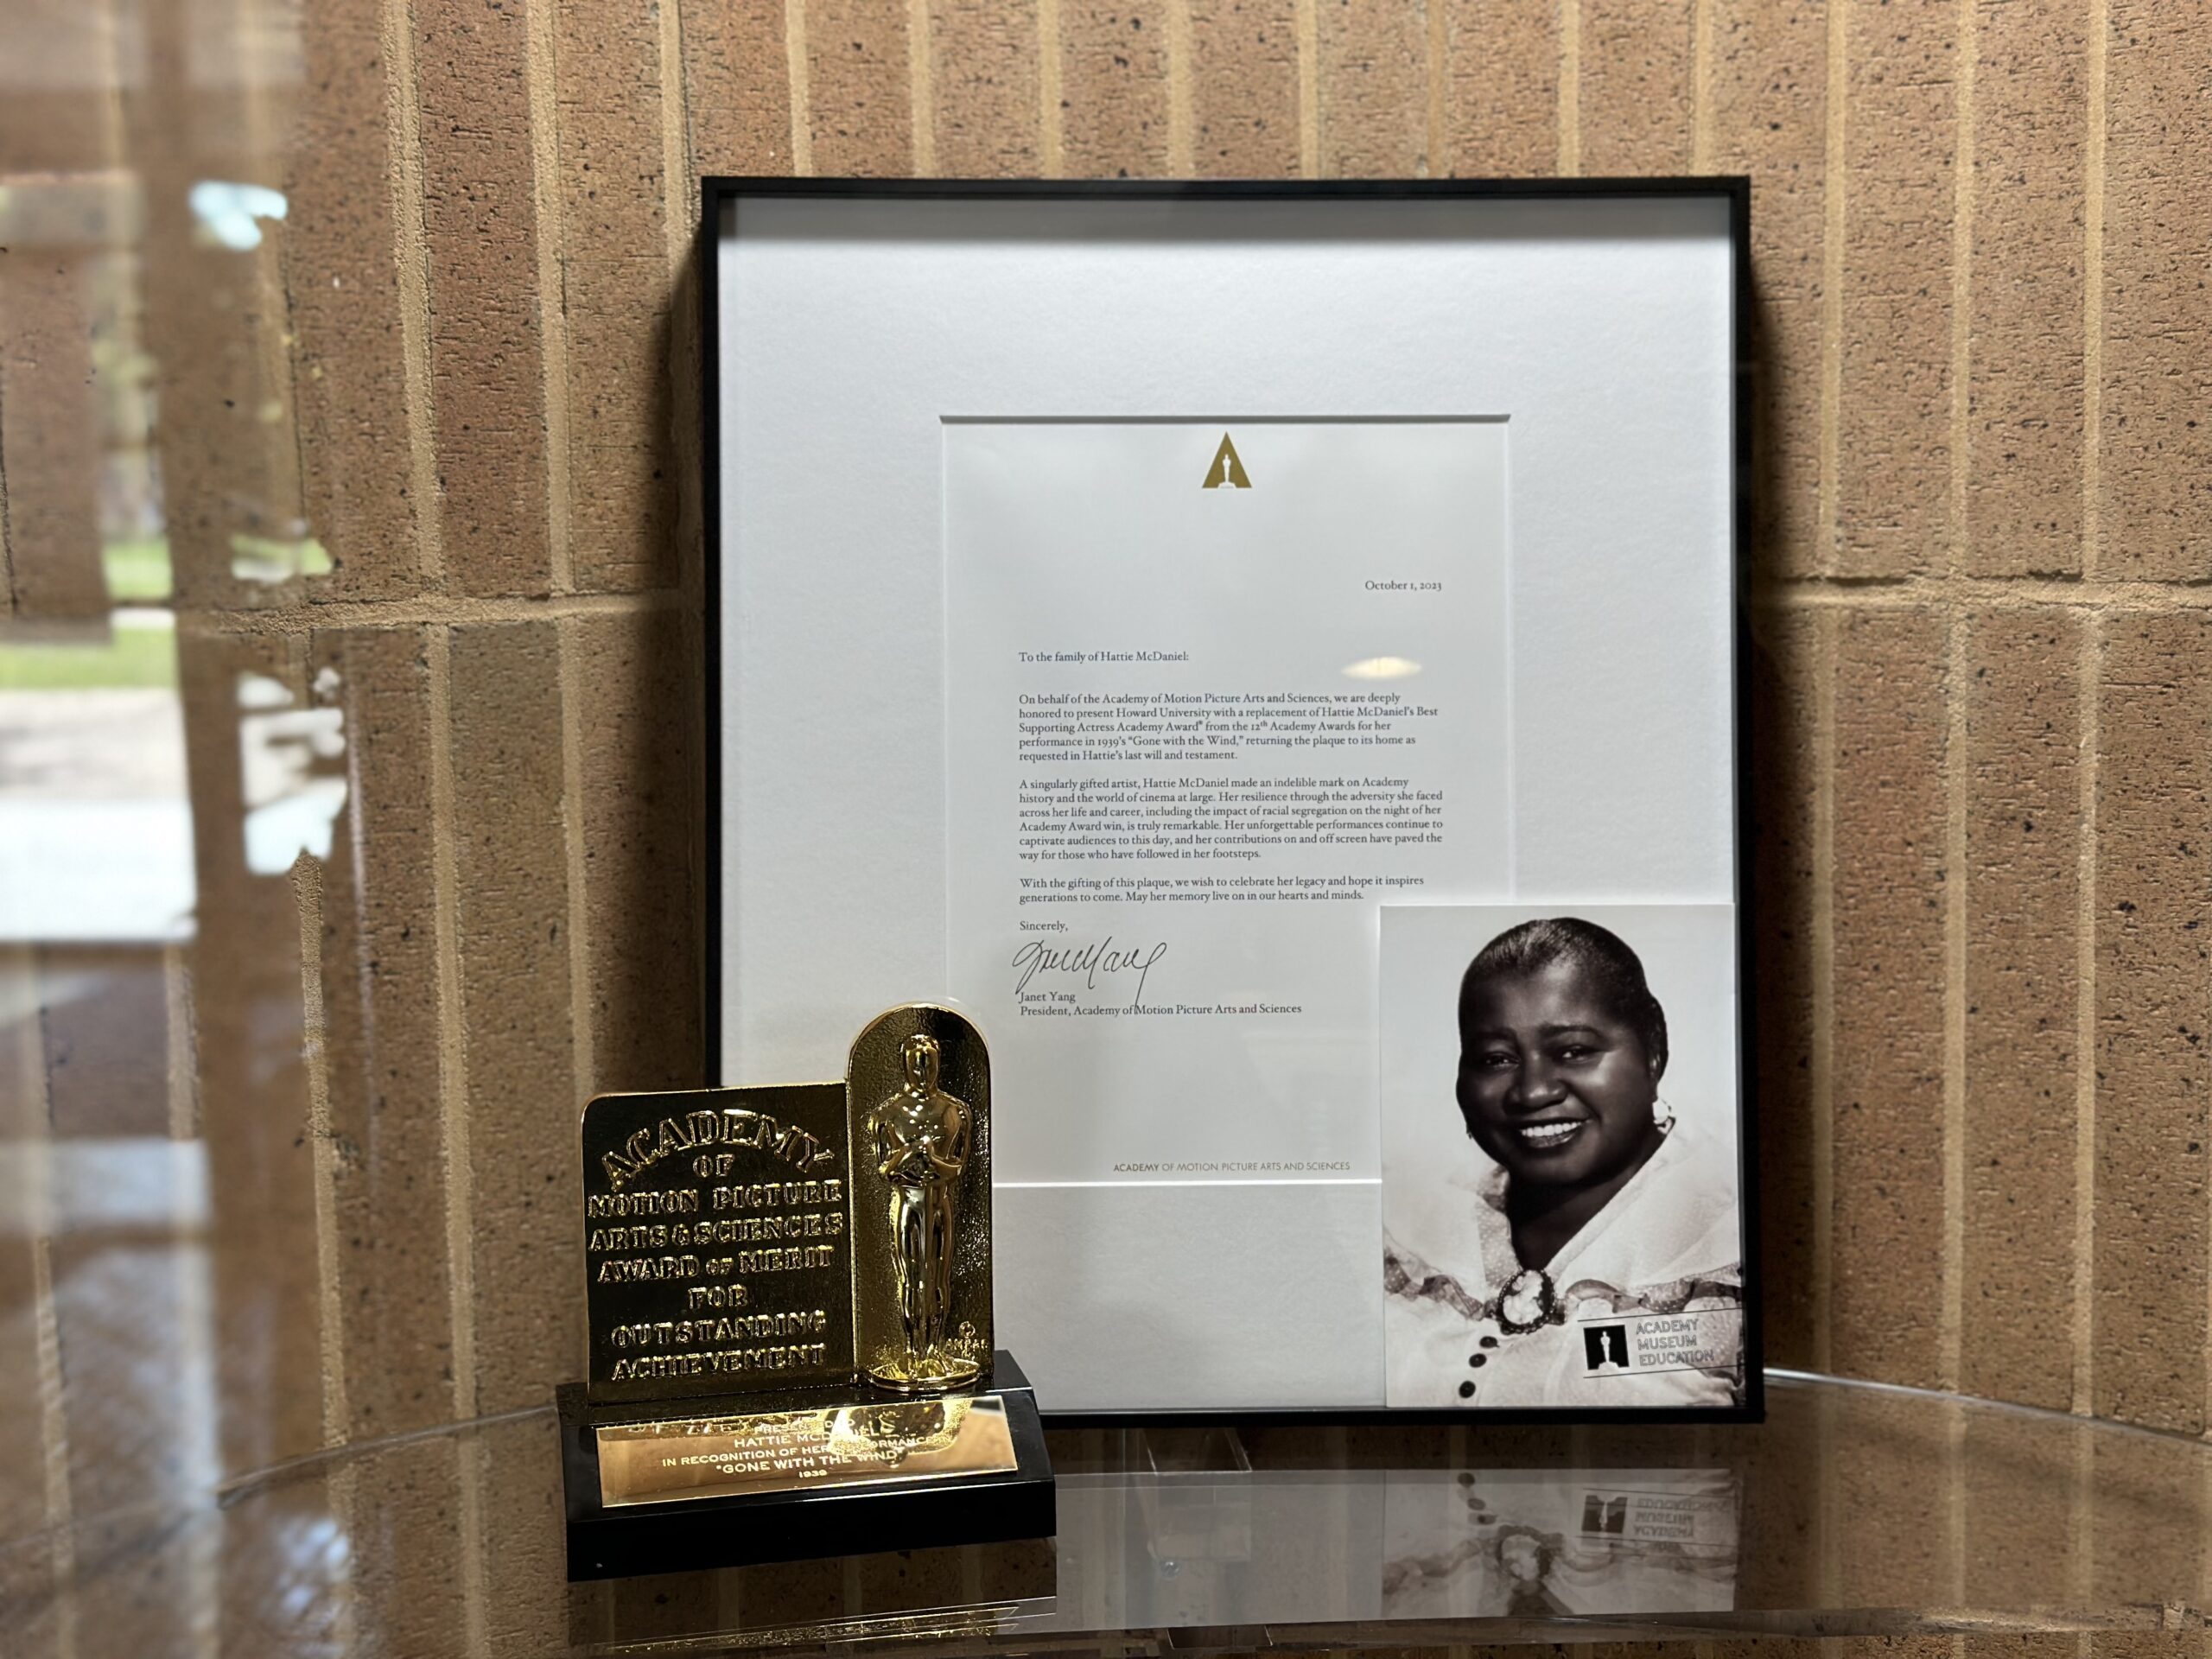 ‘Hattie’s Comes Home’: The Academy Replaces Hattie McDaniel’s Missing Oscar at Howard Event